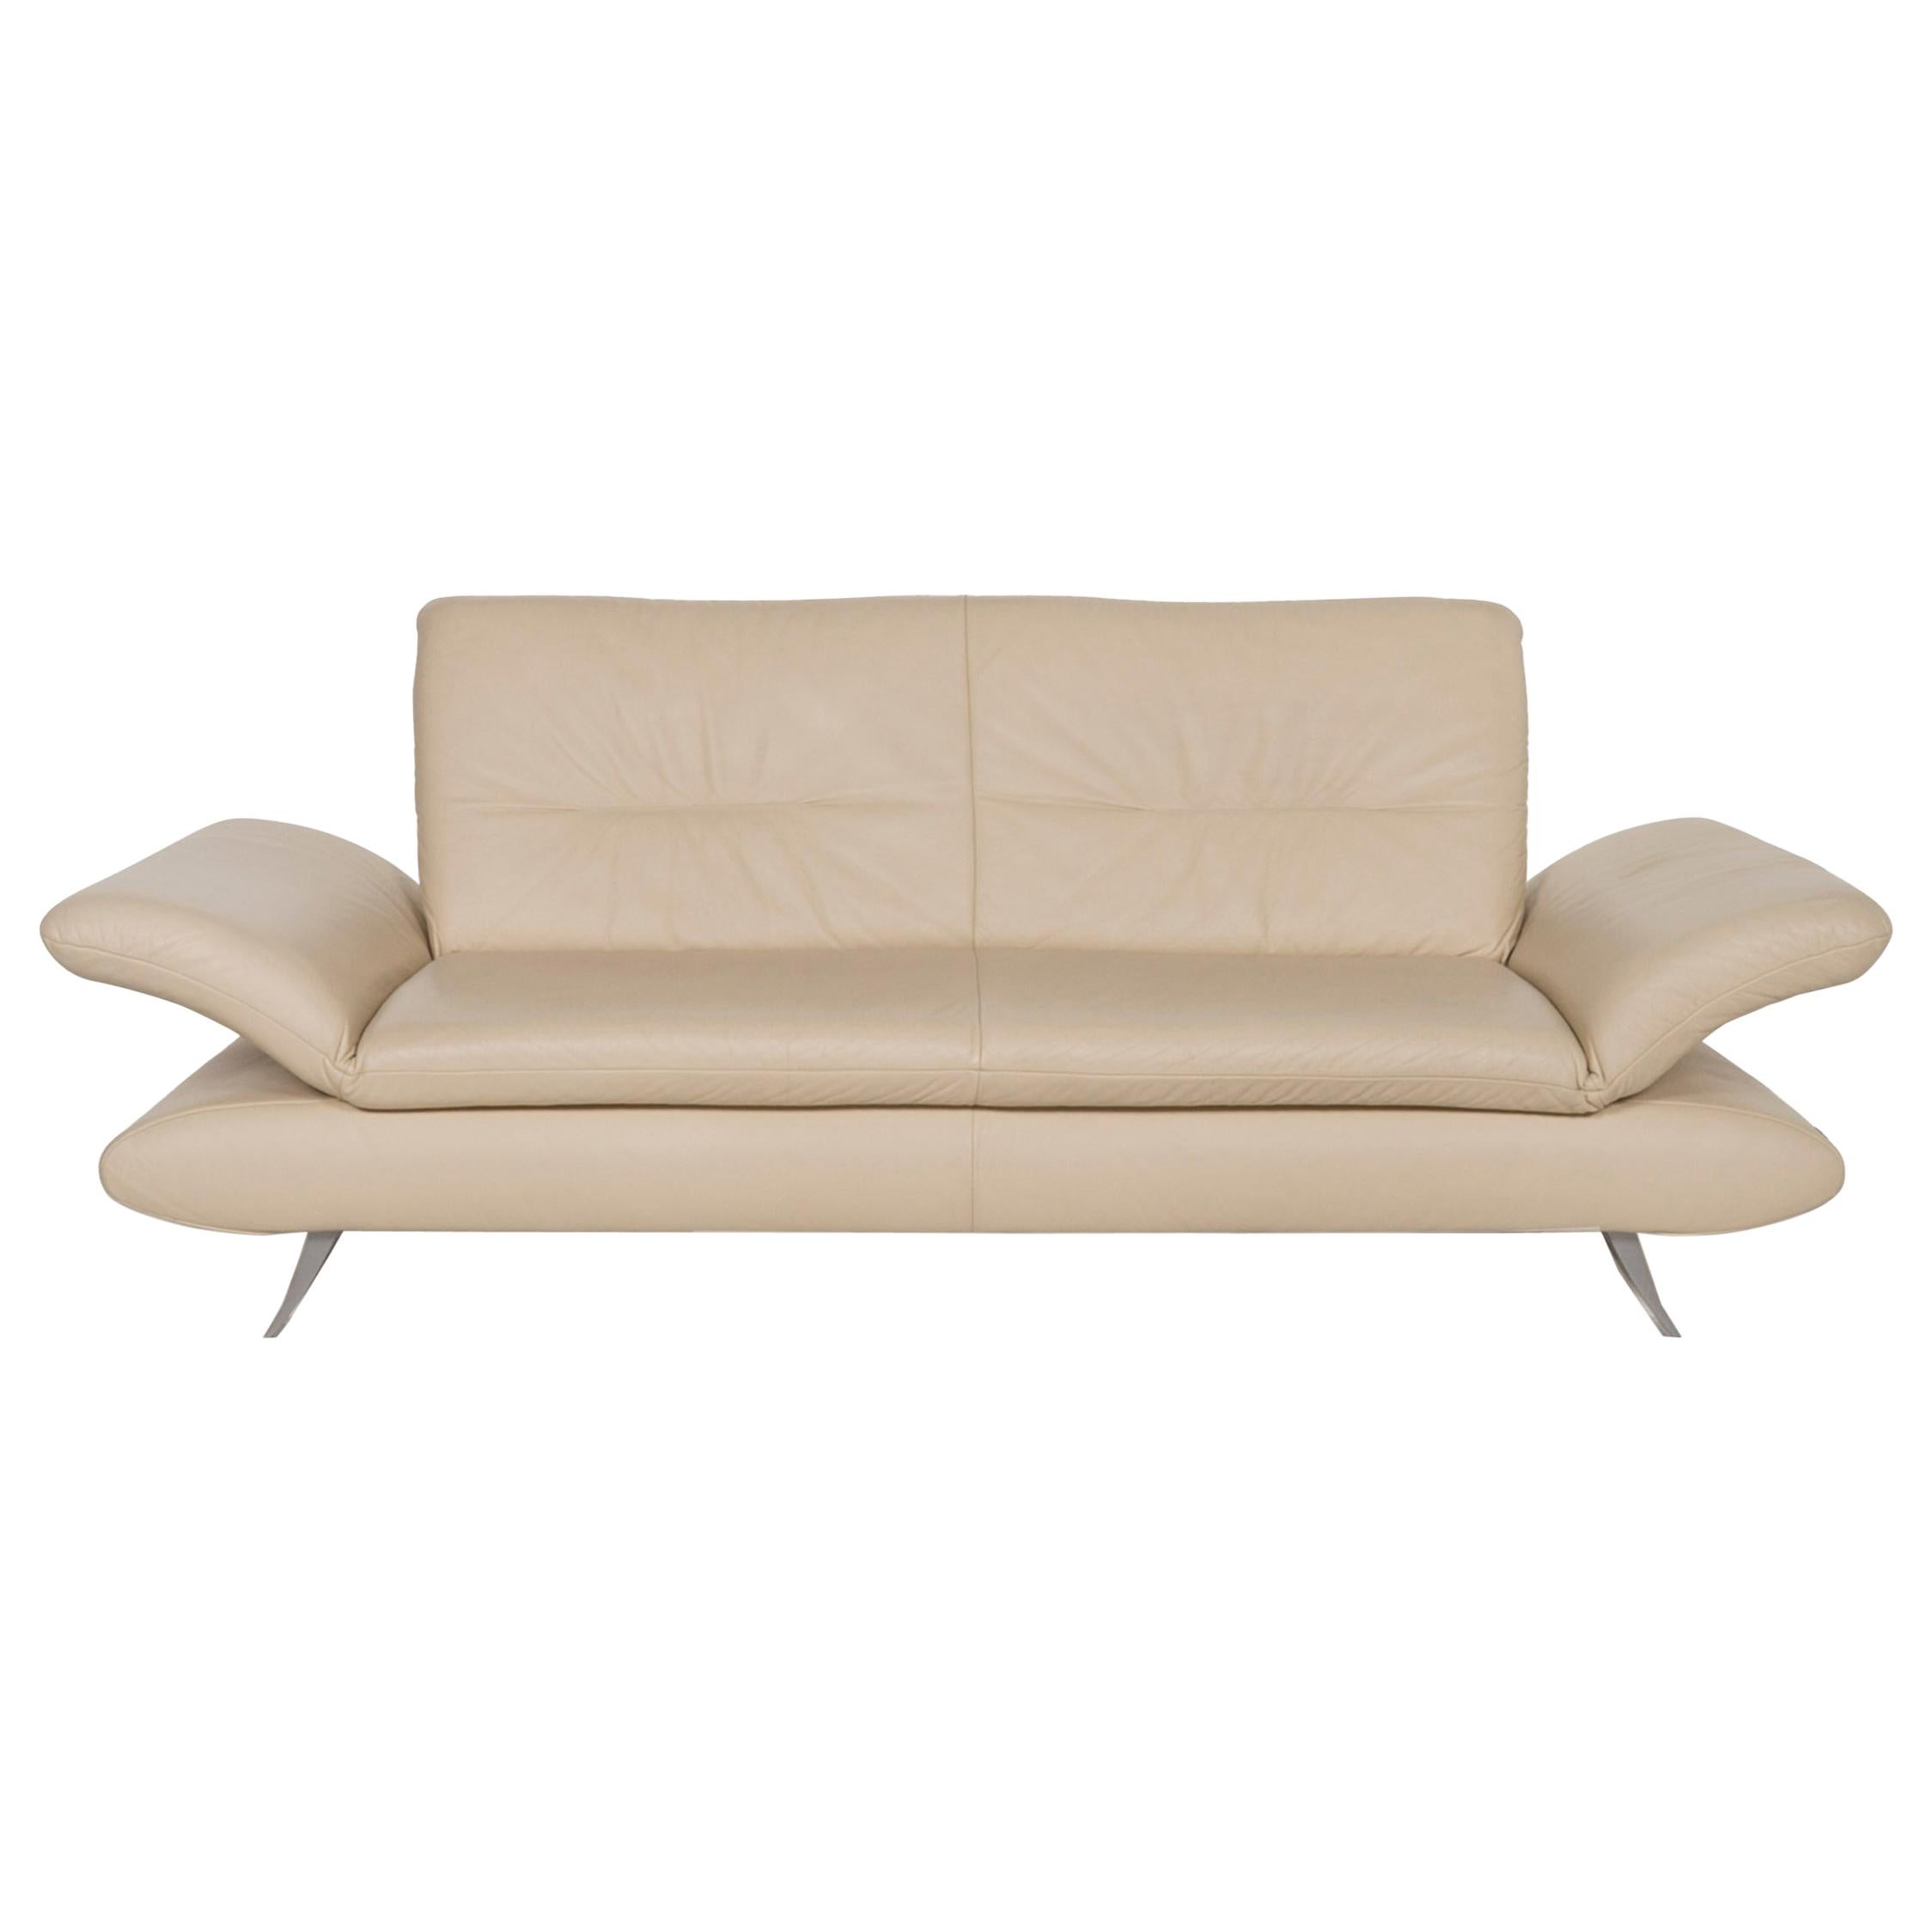 Koinor Rossini Leather Sofa Beige Two-Seater